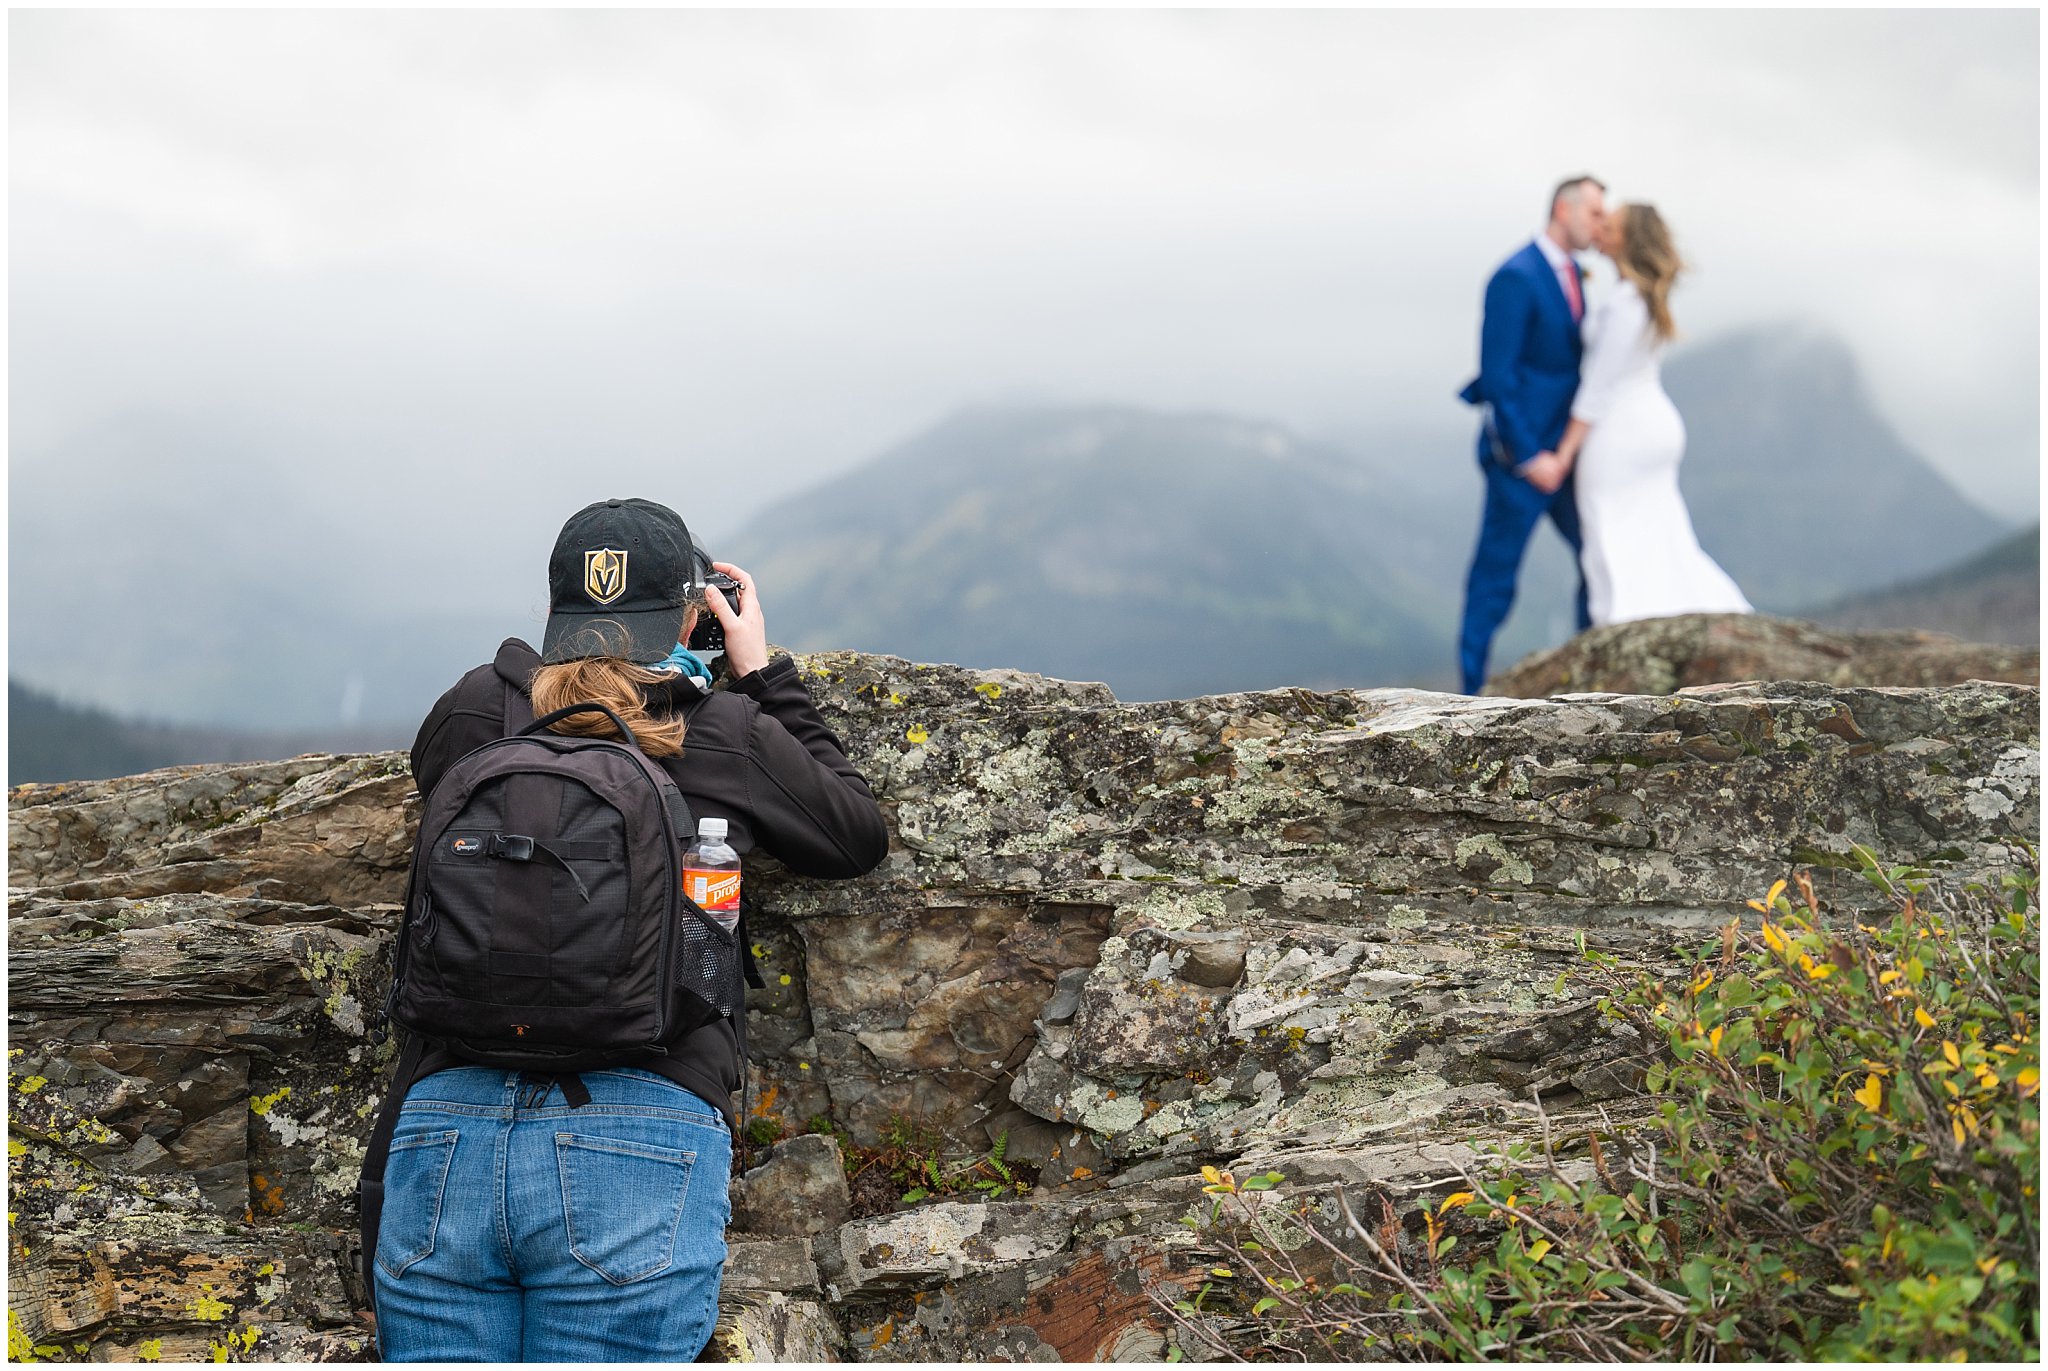 Moments from our year as Utah Wedding Photographers | Jessie and Dallin Behind the Scenes 2021